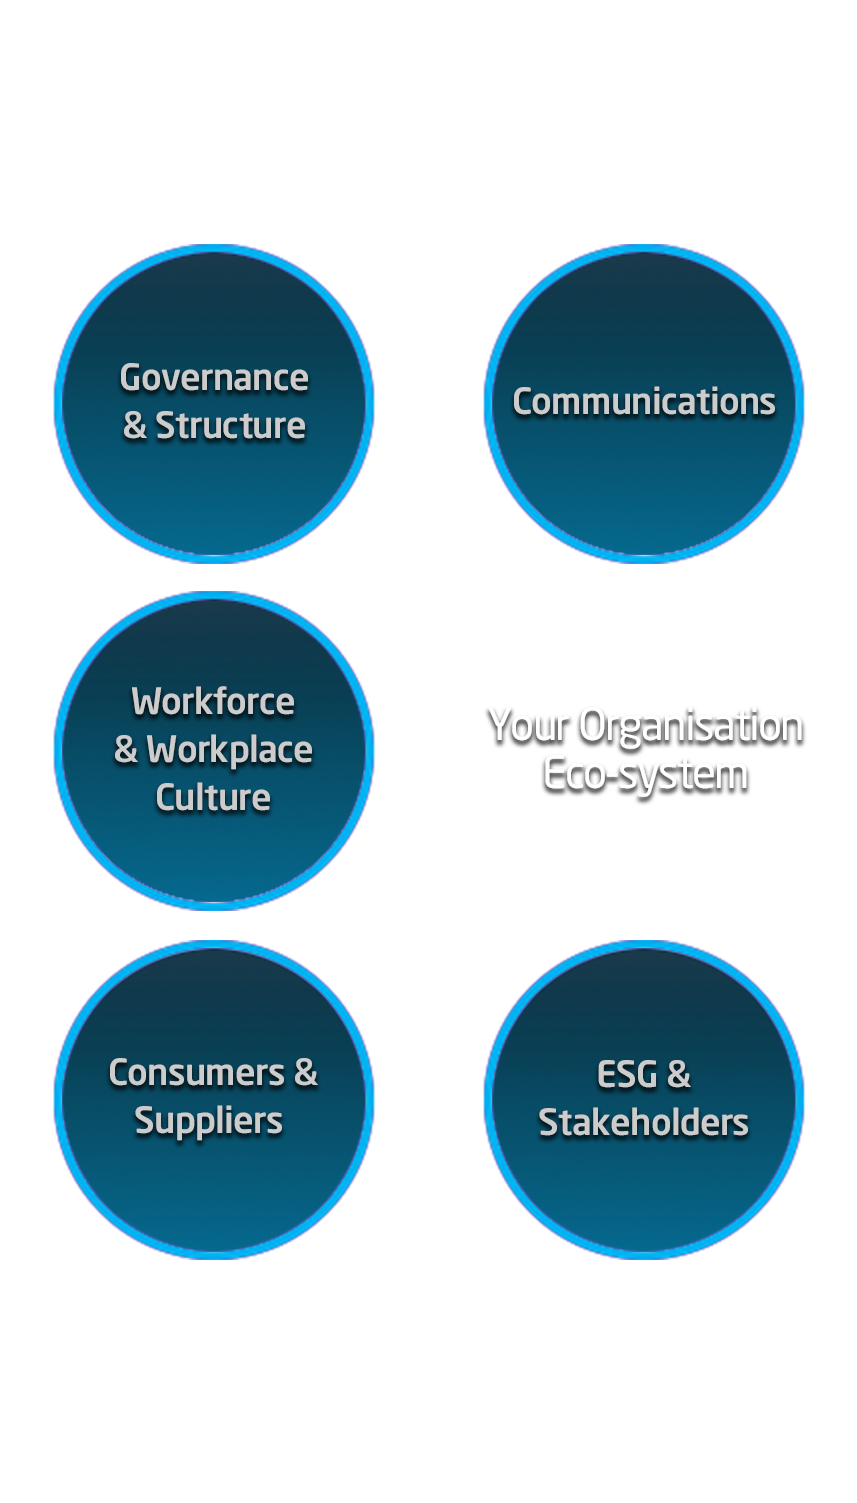 Your Organisation Eco-system